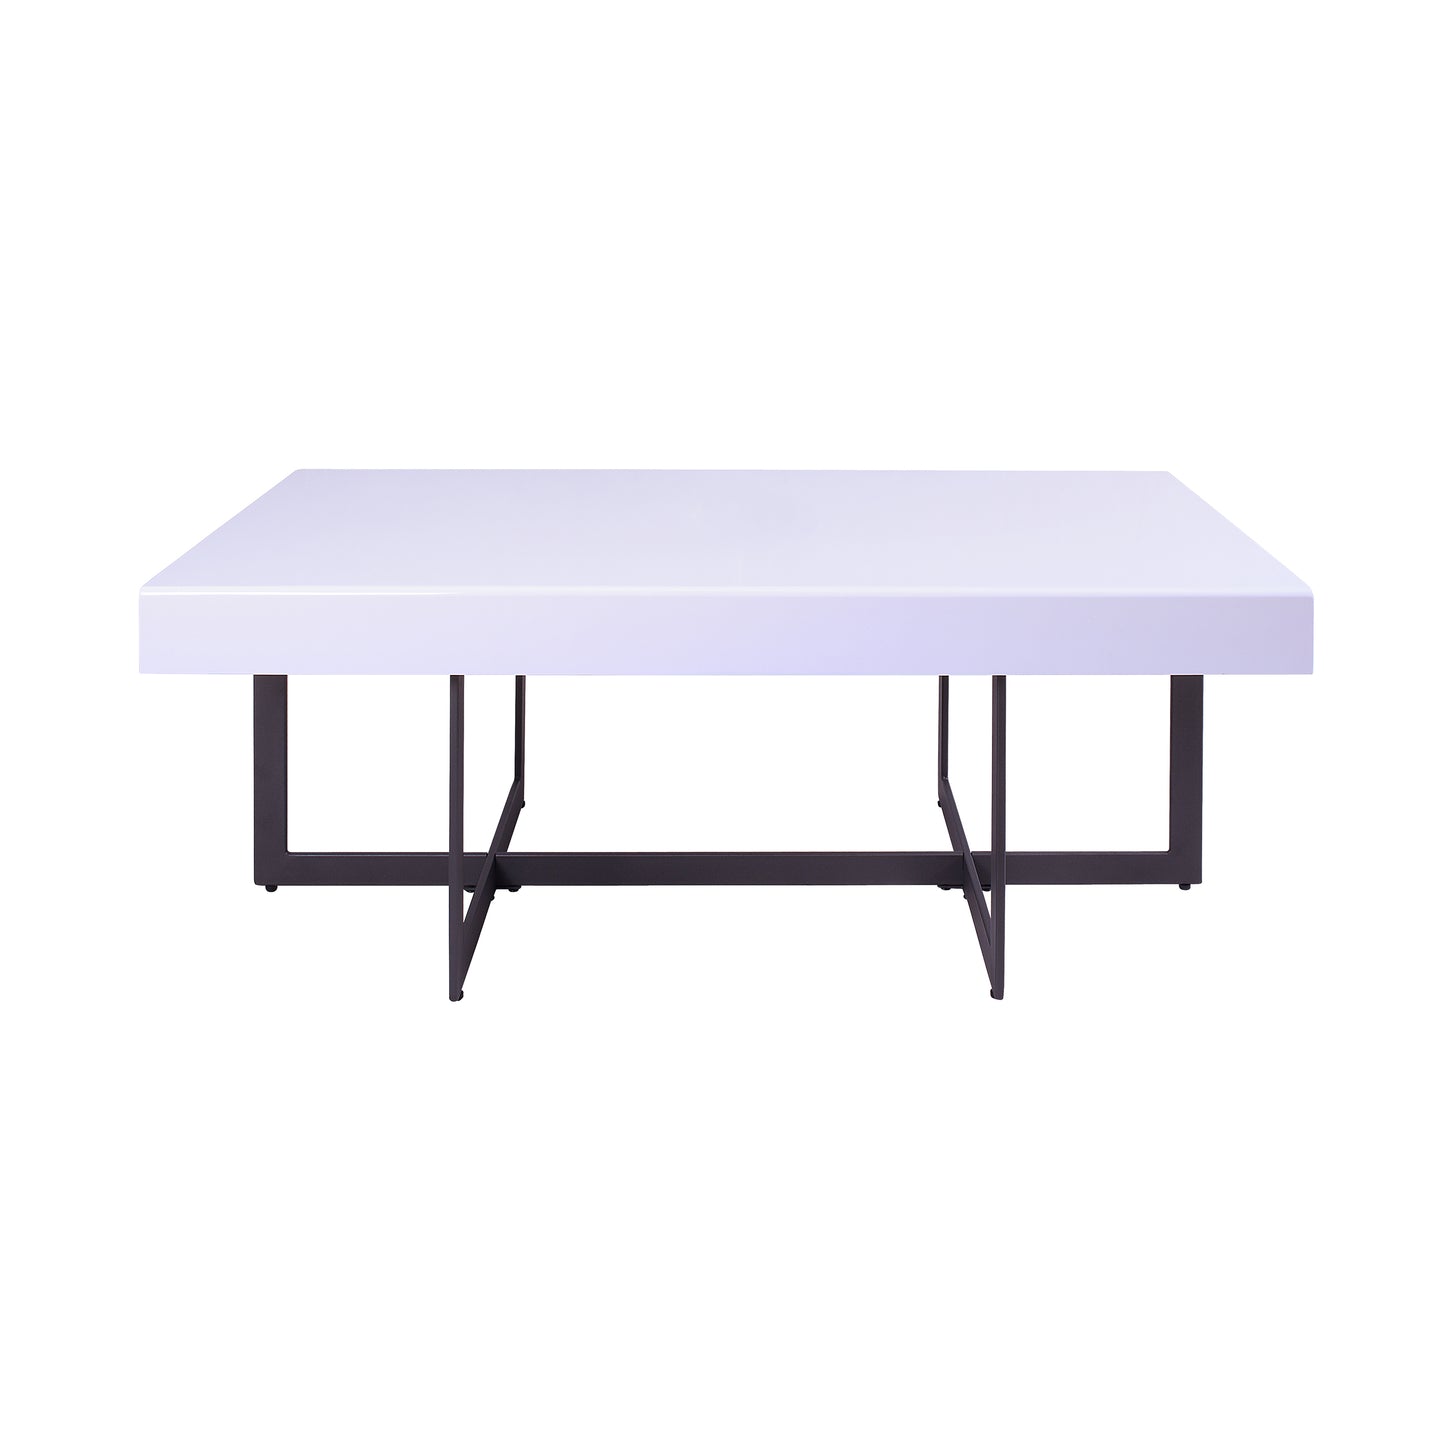 Front-facing coffee table only from a three-piece modern white high gloss and gunmetal storage coffee table set with hidden drawers on a white background